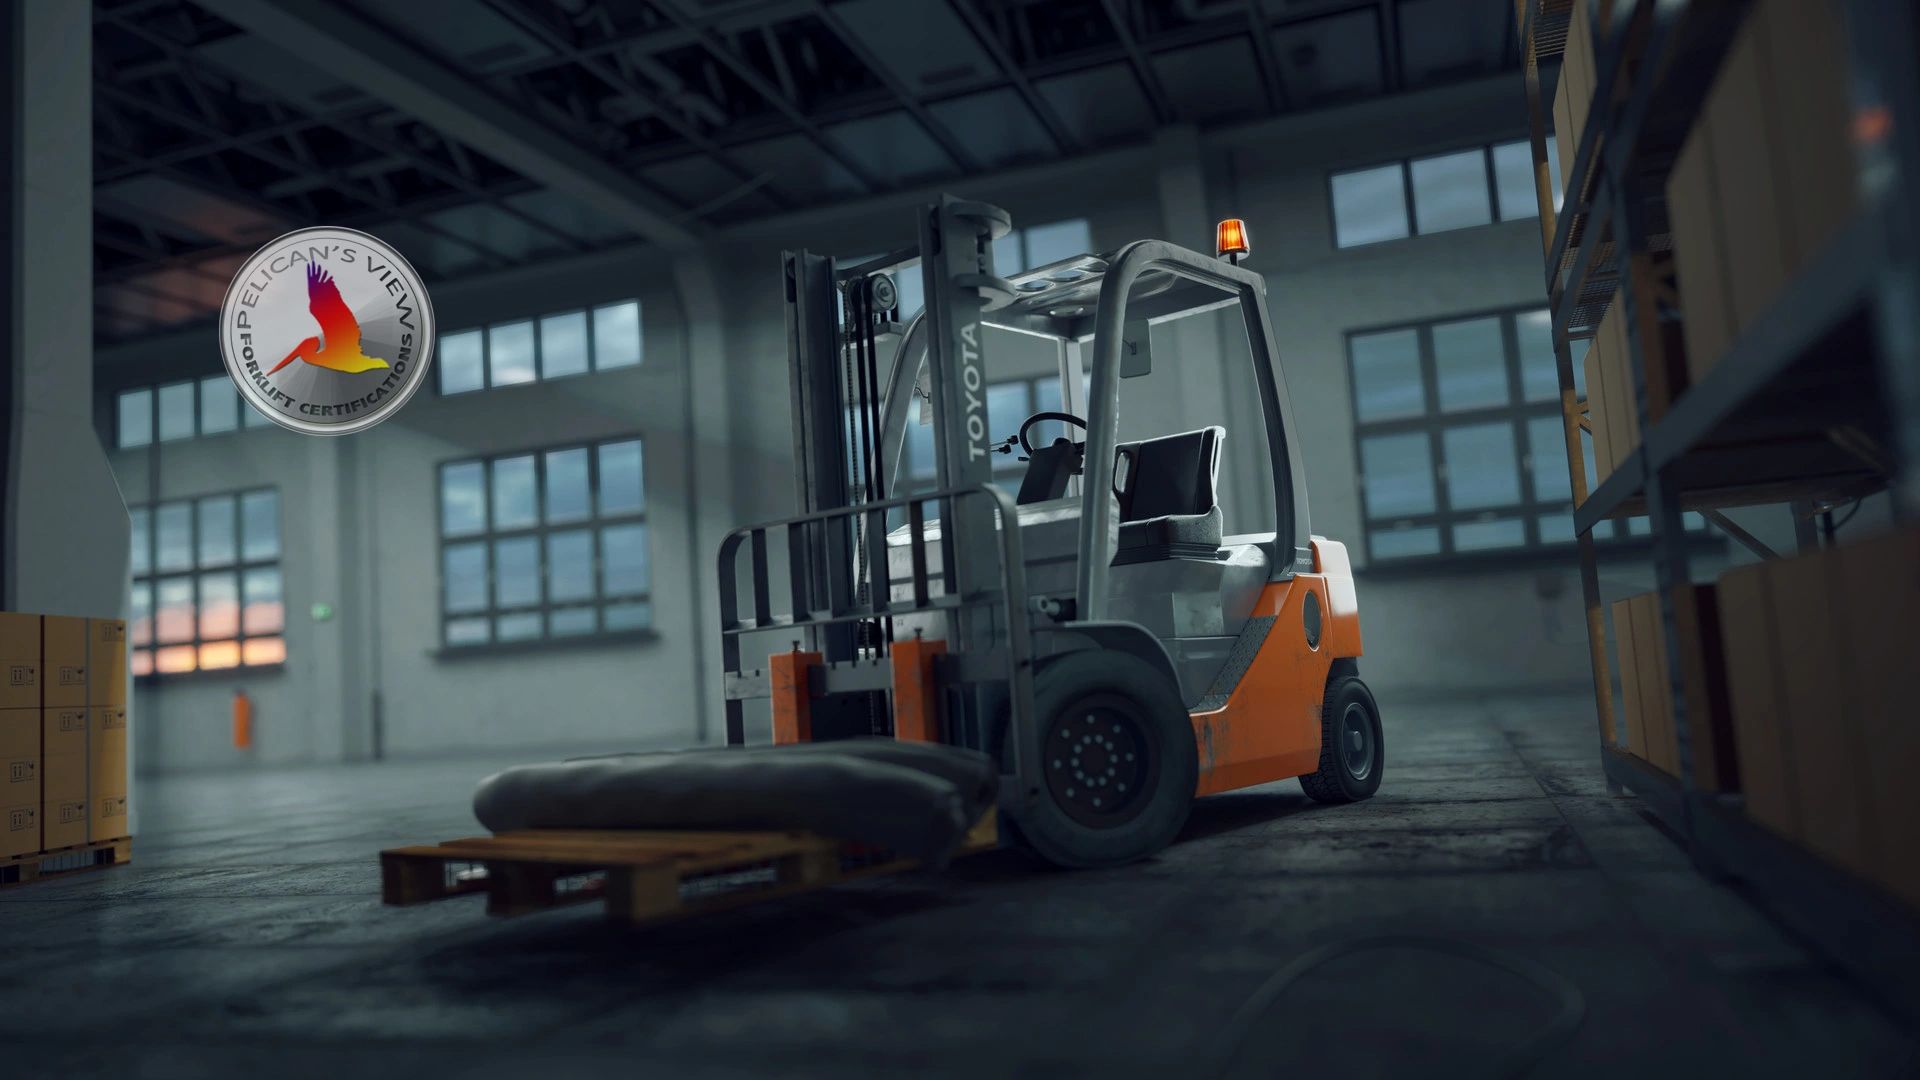 Forklift Safety Training Pelican S View Forklift Safety Training